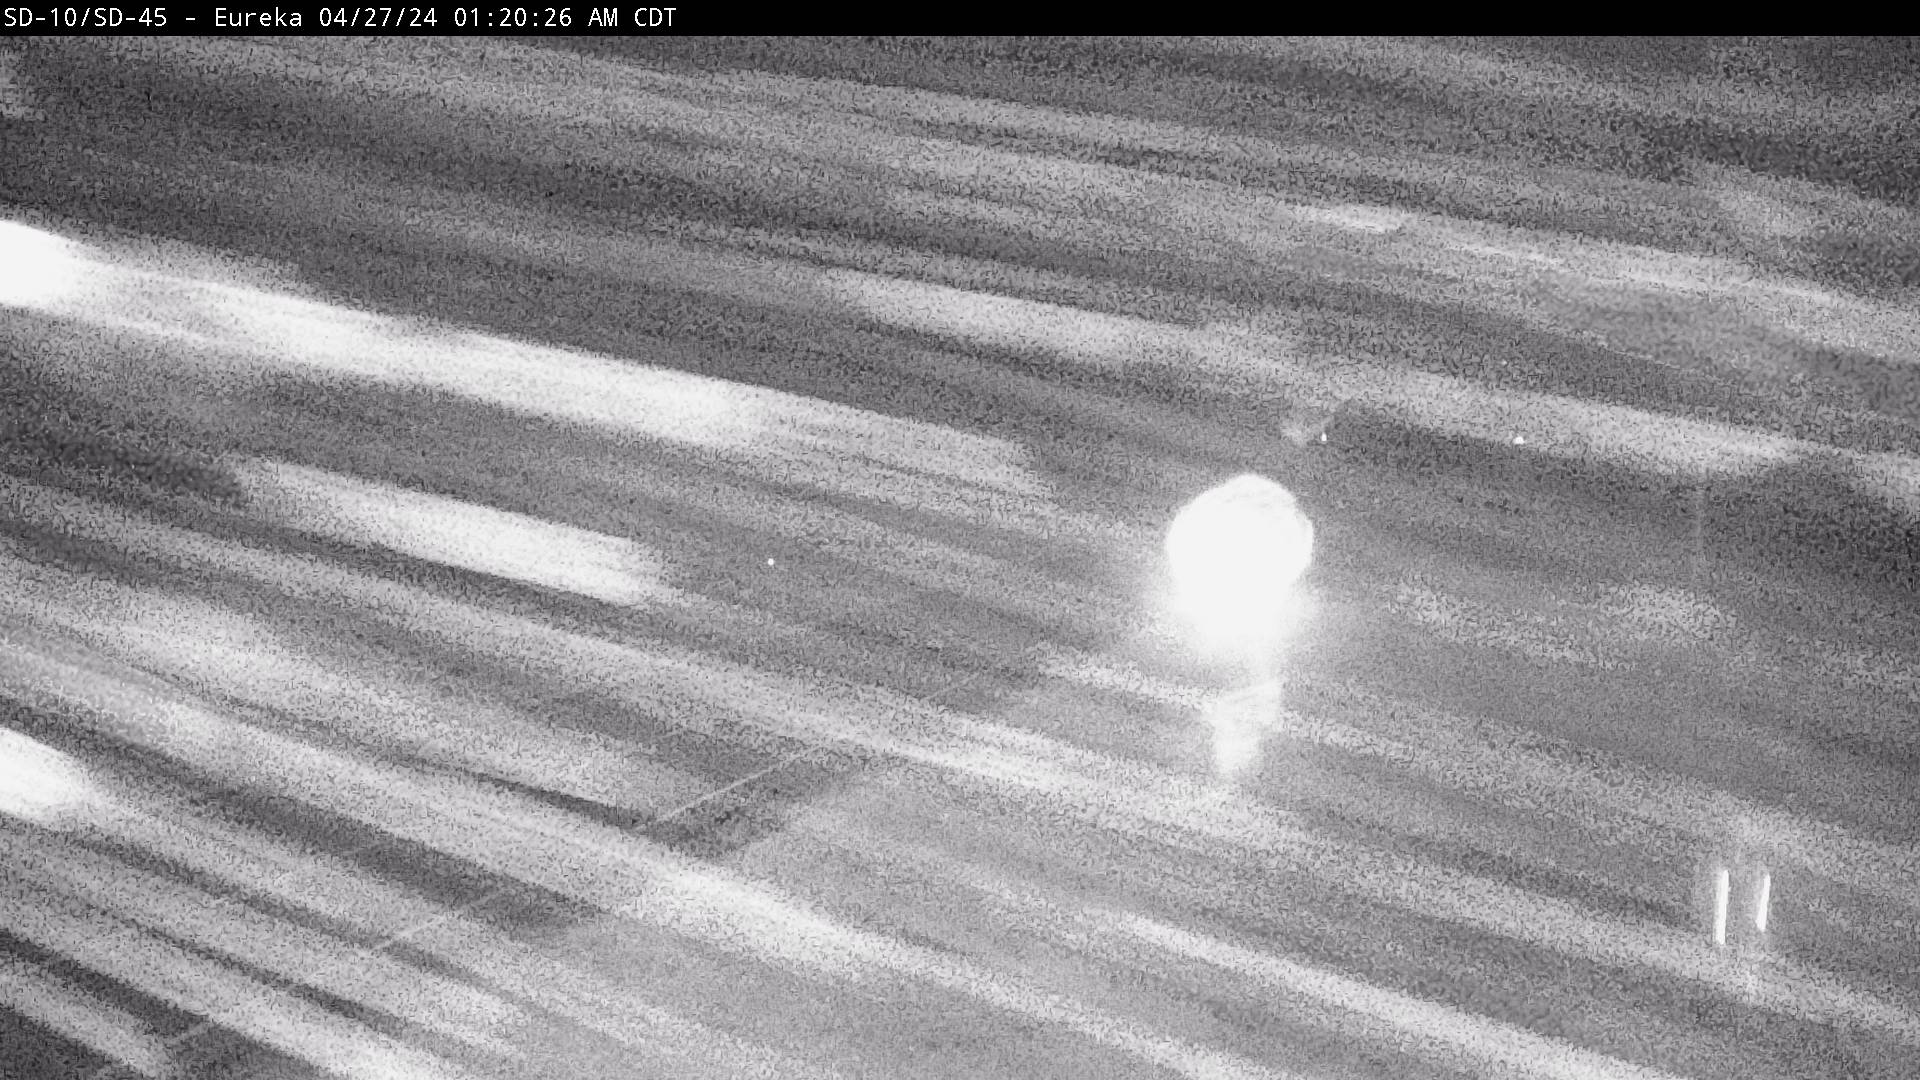 13 miles east of town at SD-10 & SD-45 & SD-247 - East Traffic Camera